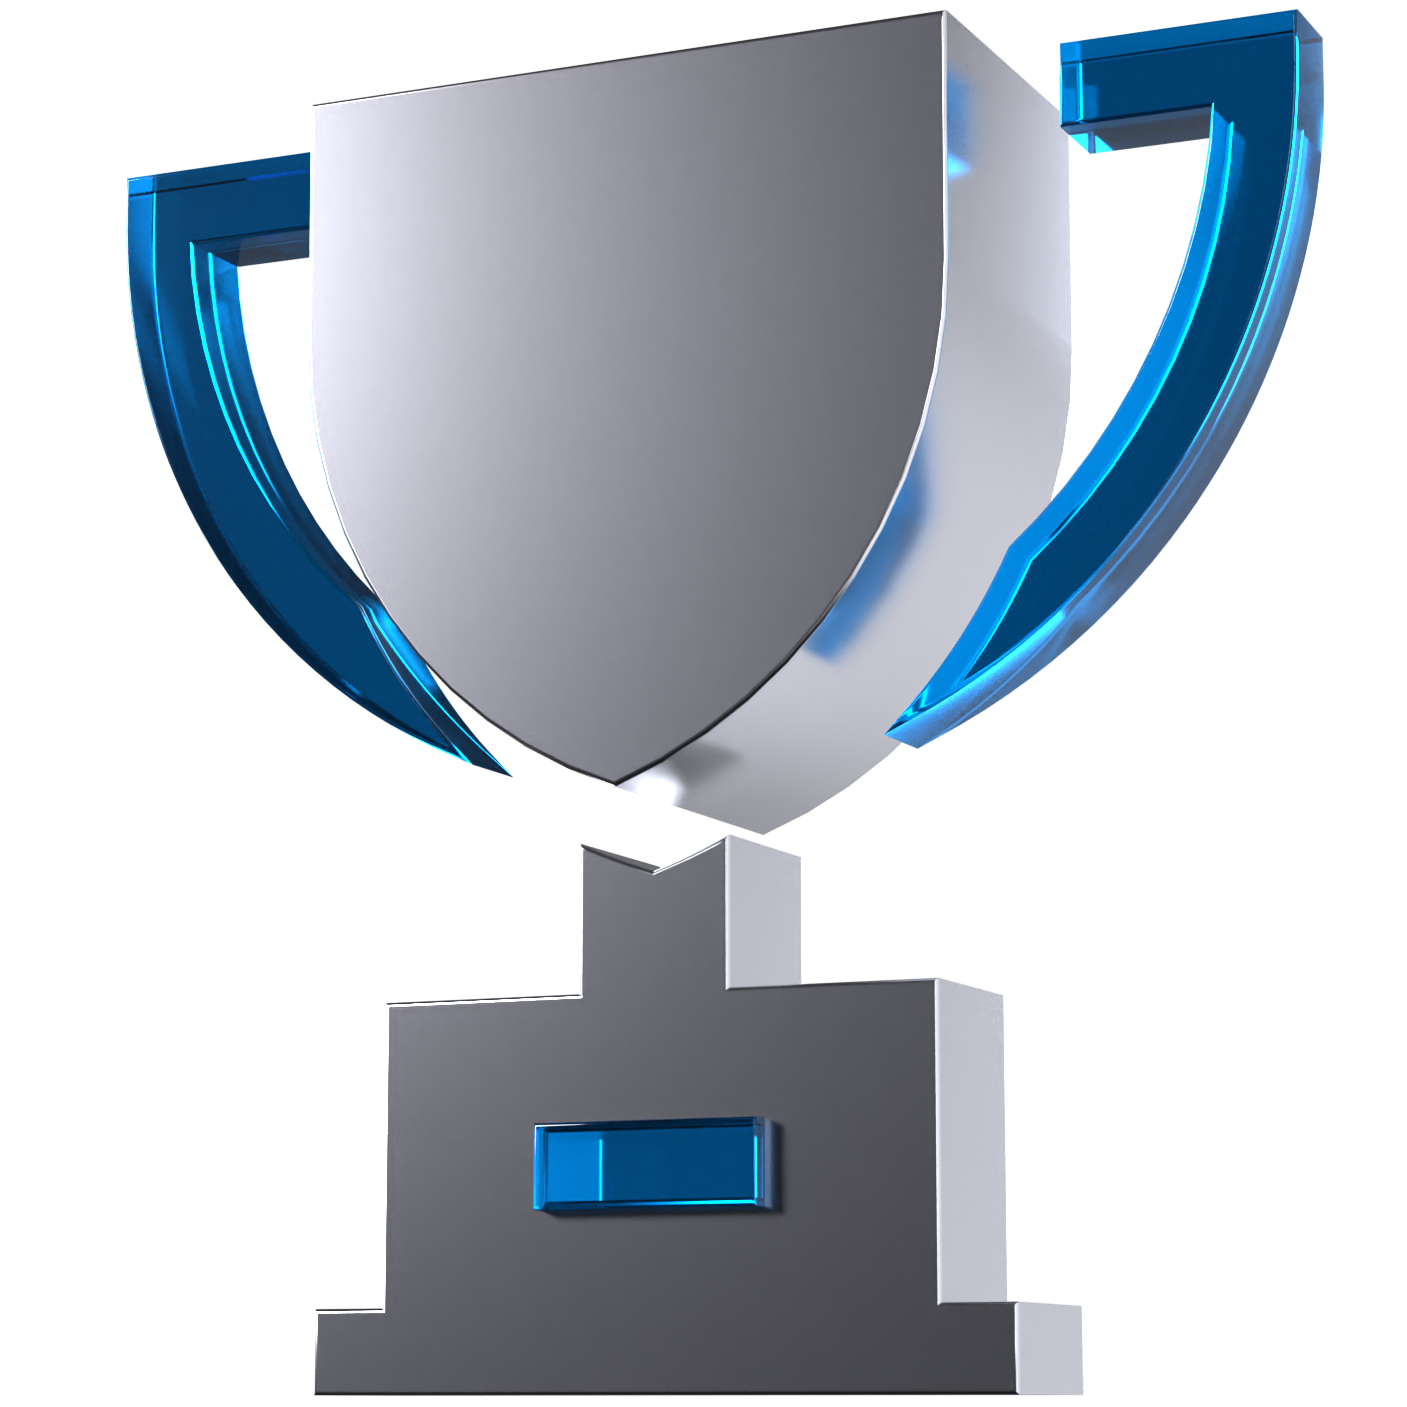 A 3D icon of a trophy